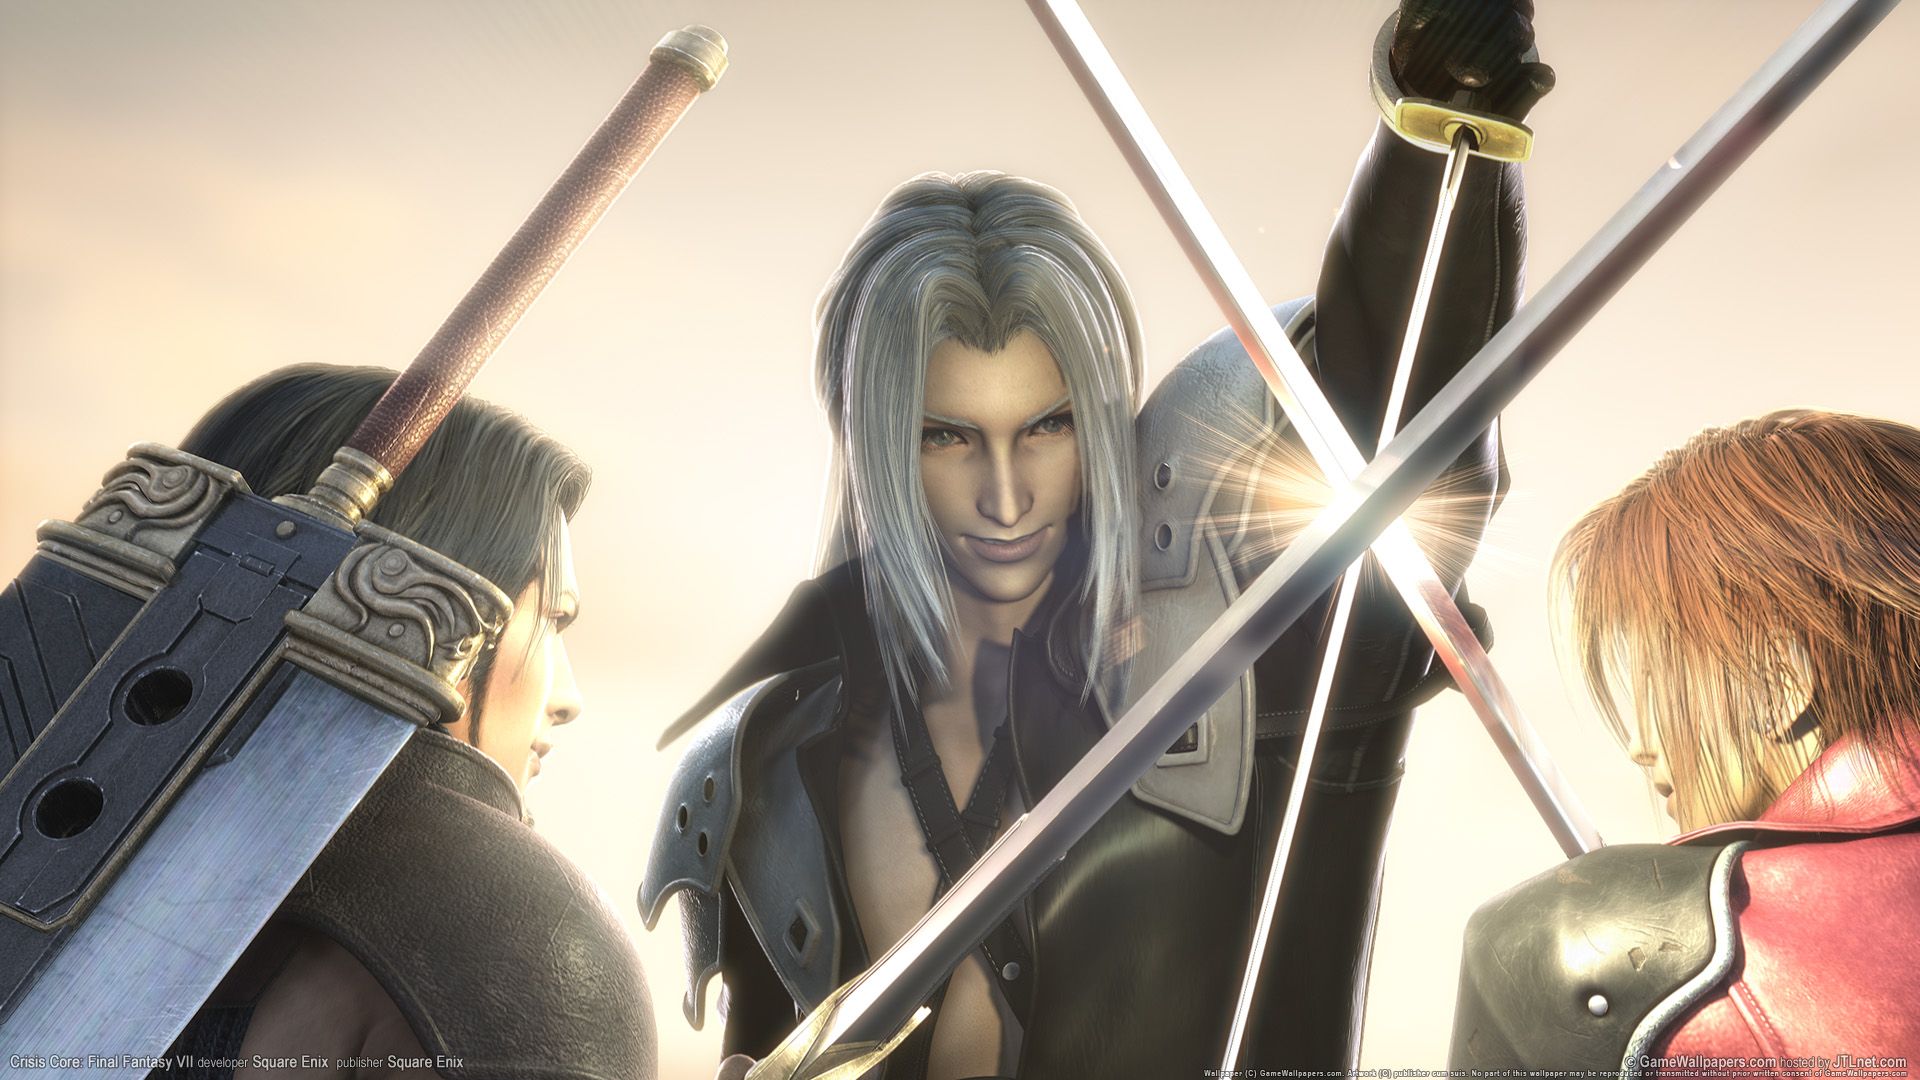 Sephiroth Wallpapers 1920x1080 | Free Pictures Finder